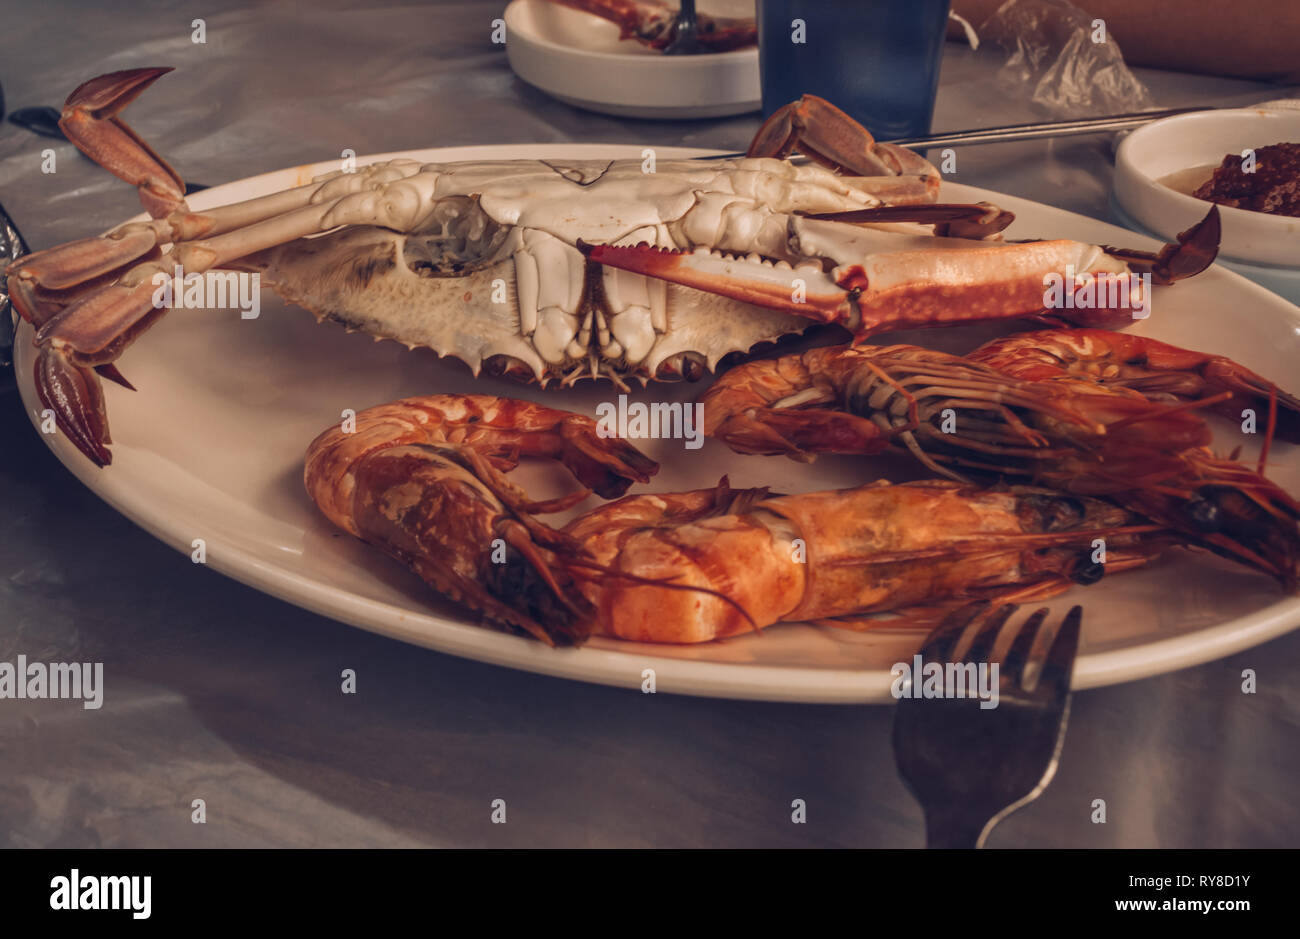 close up view of boilled shrimps and crab on plate in natural cafe environment Stock Photo